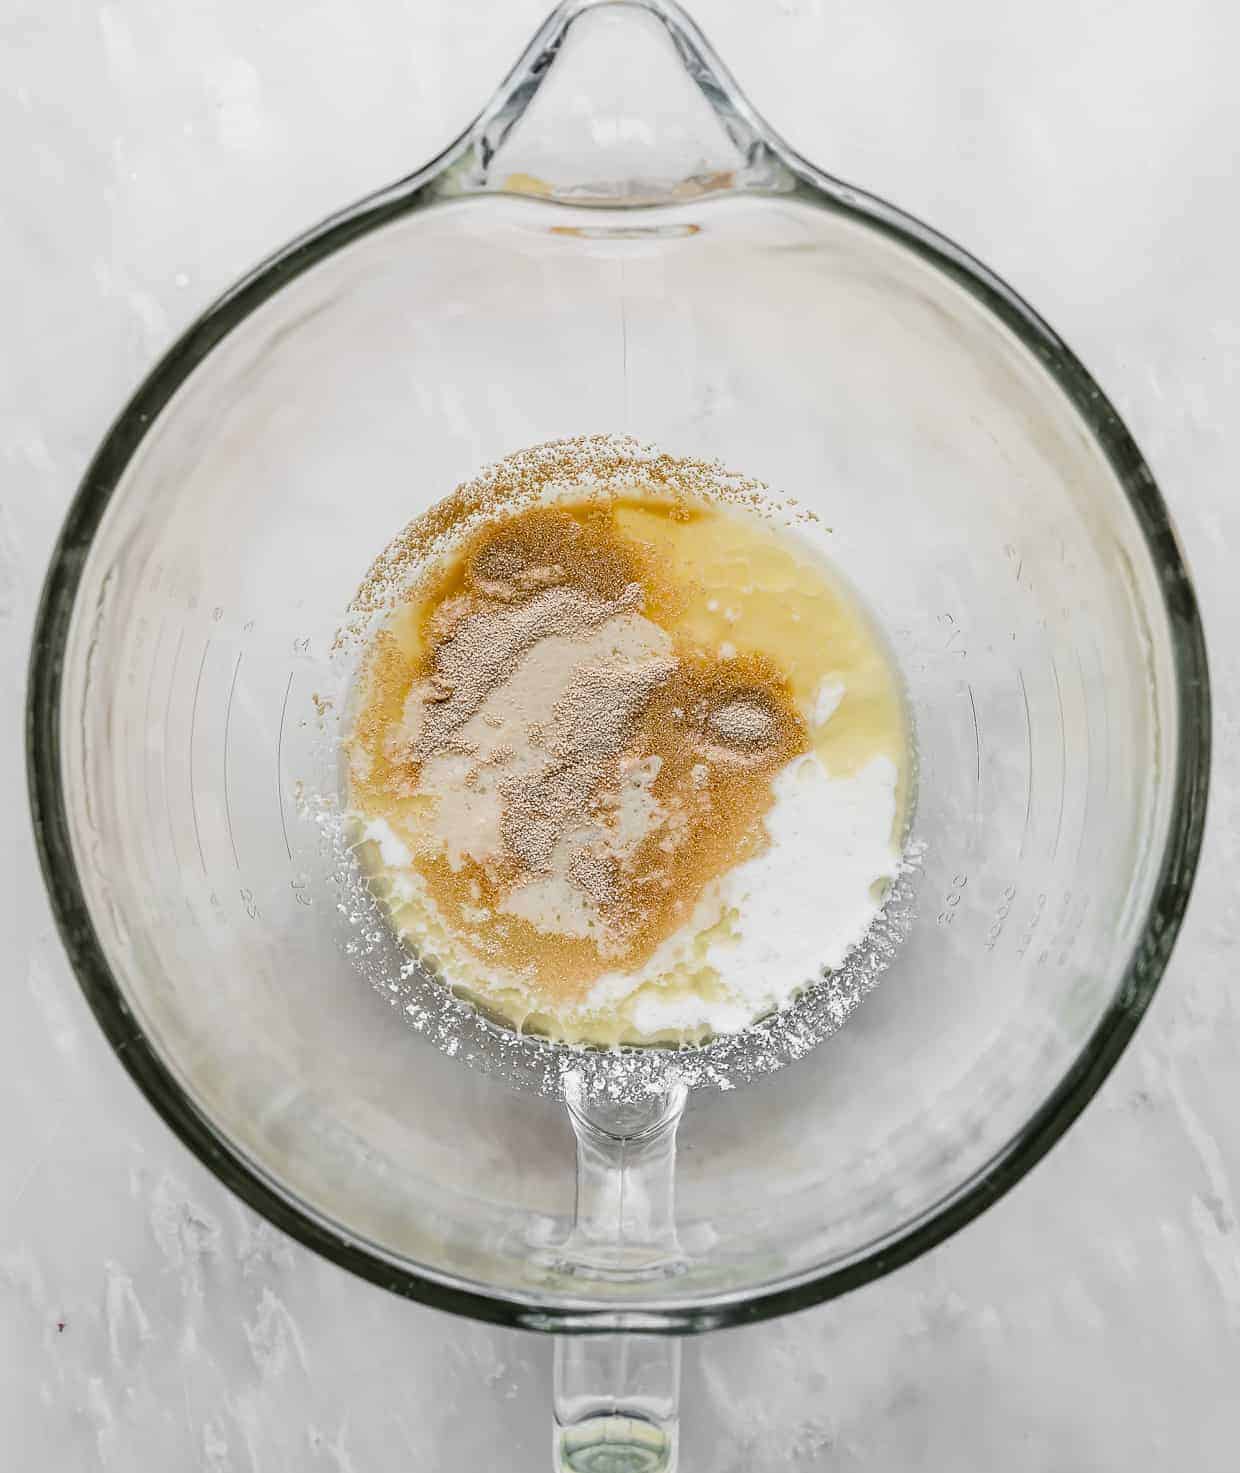 A glass mixing bowl with yeast, buttermilk, butter, and water in it.